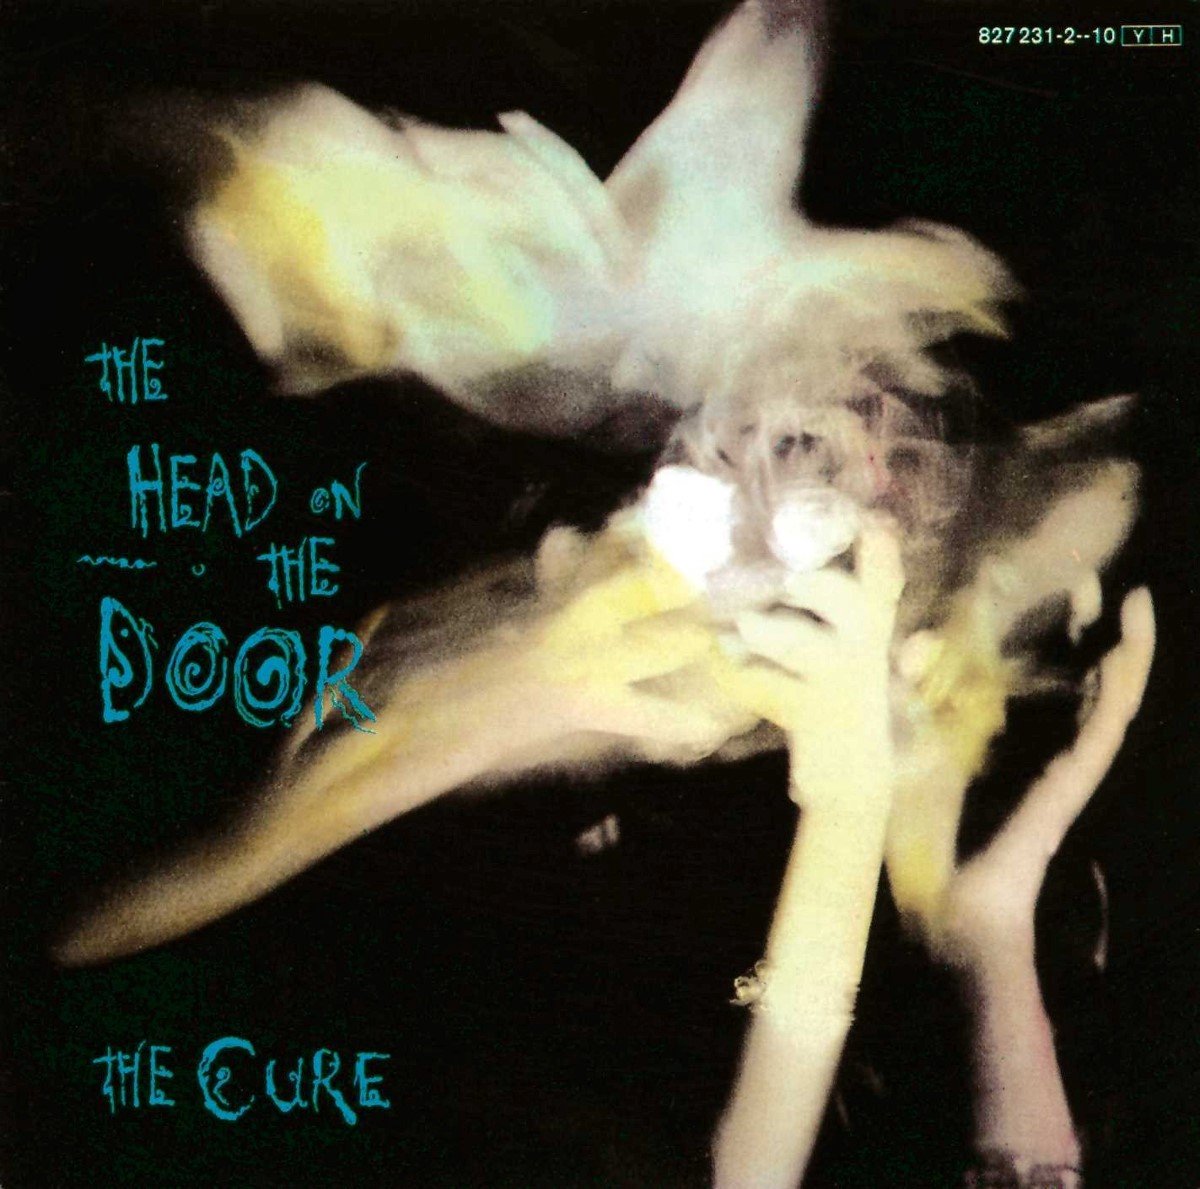 The Cure - The Head On The Door (CD) (Remastered) - The Cure